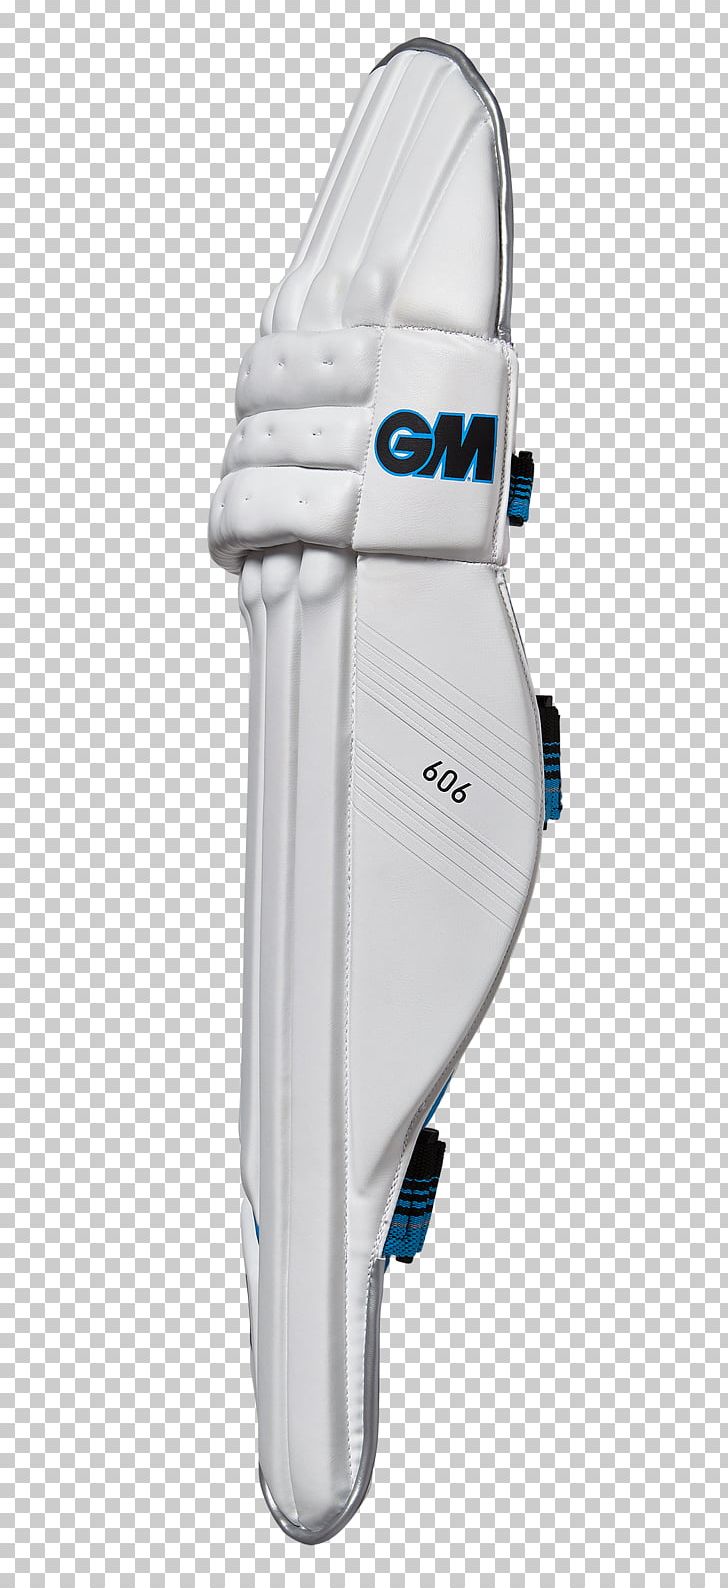 Protective Gear In Sports Pads Cricket General Motors Batting PNG, Clipart, Bat, Batting, Cricket, Crickethockeycom, Electric Blue Free PNG Download